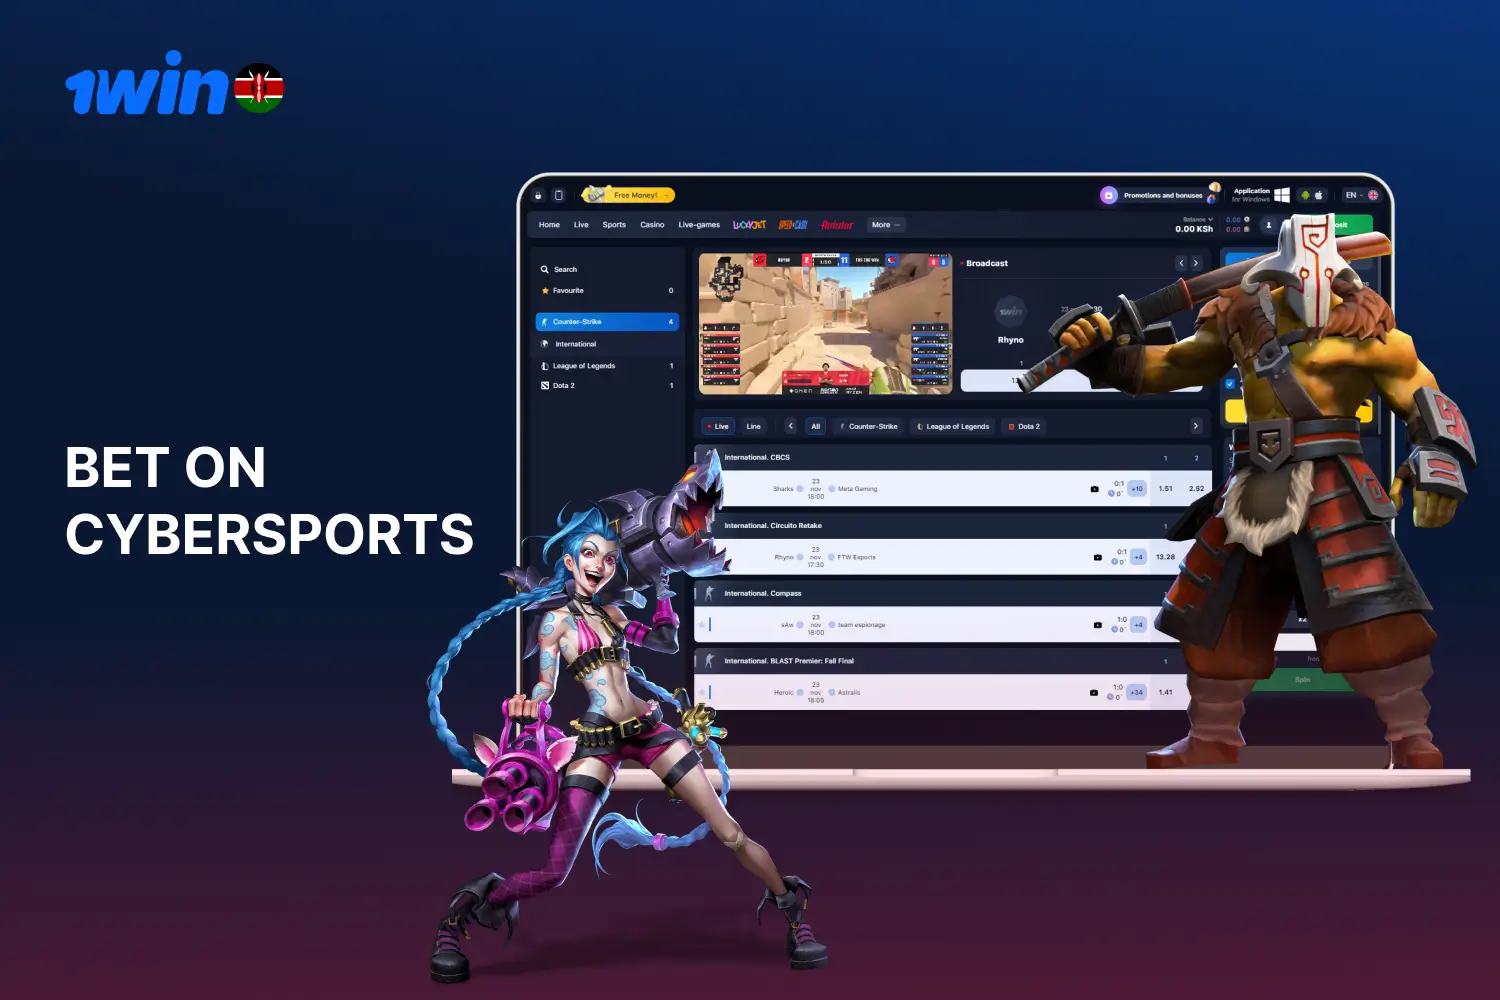 1win offers users from Kenya to bet on various cyber sports matches in more than 10 disciplines